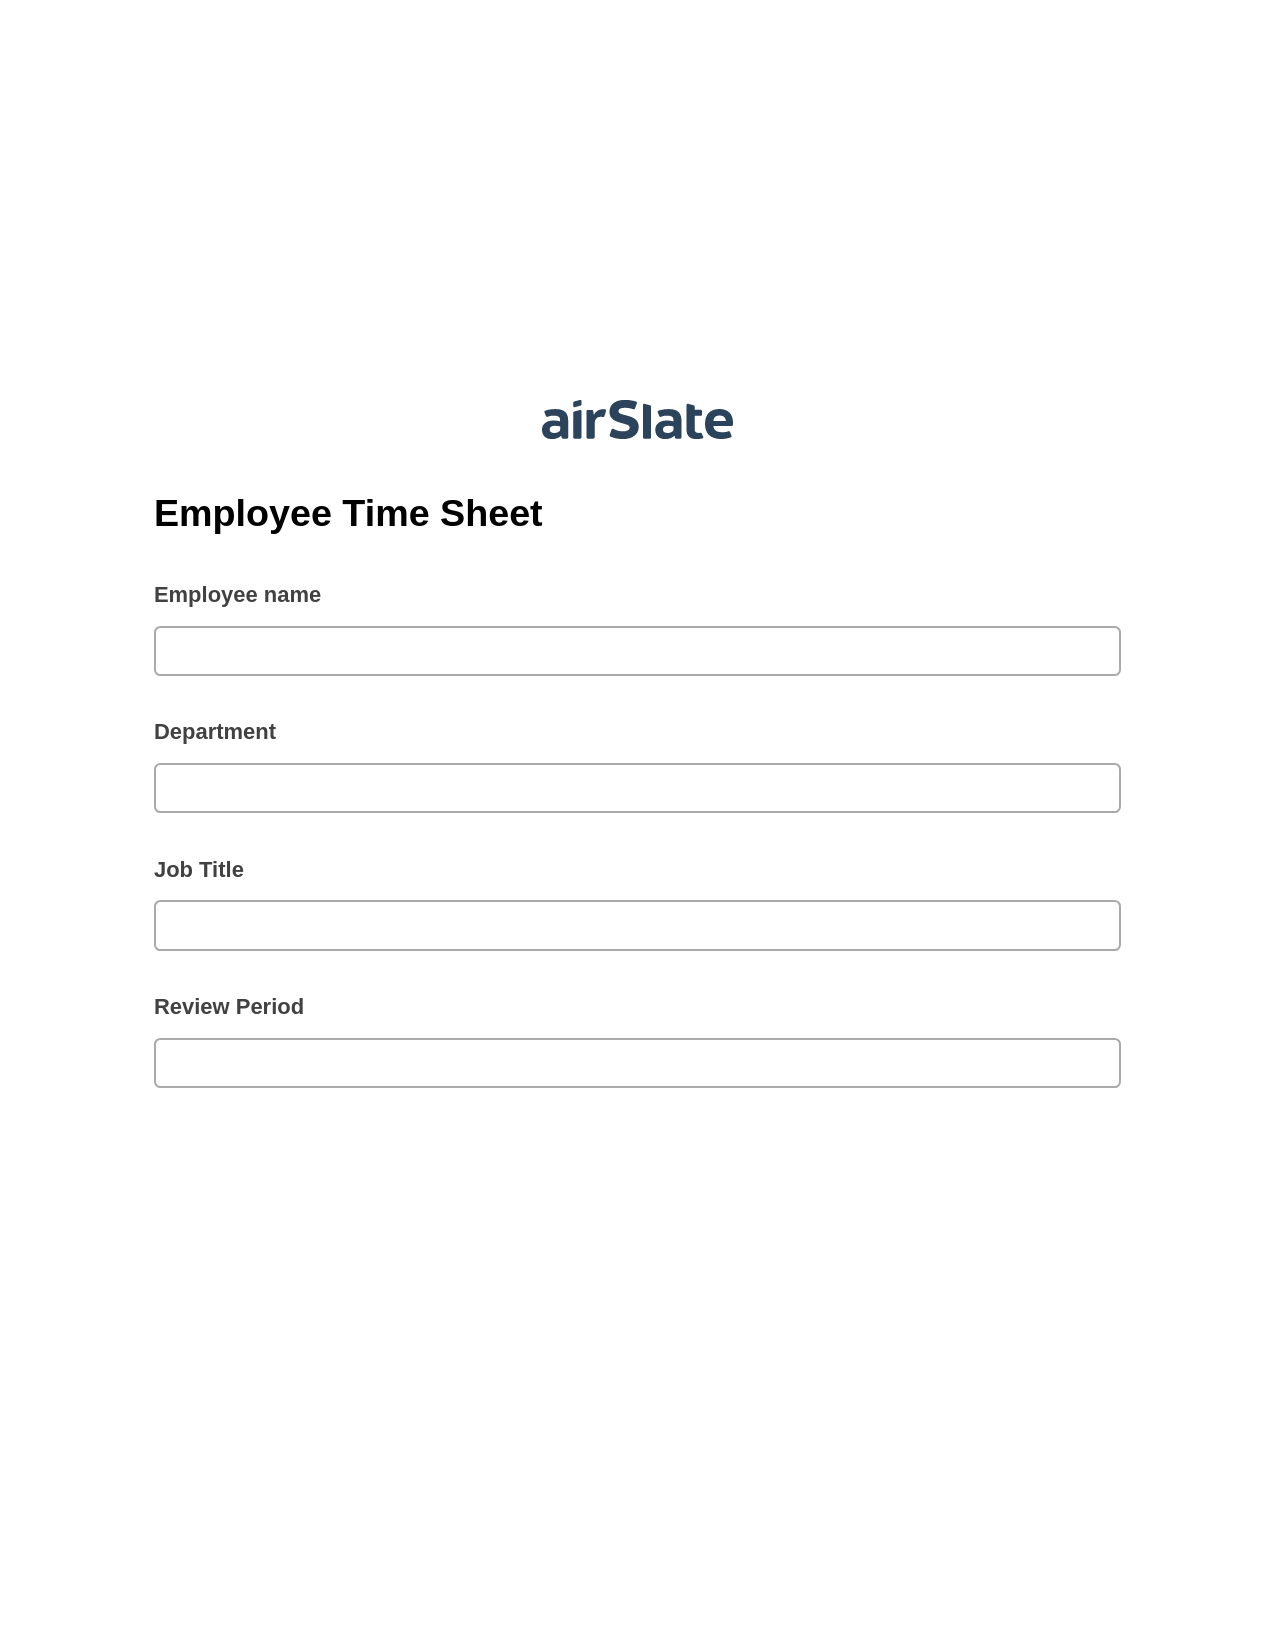 Employee Time Sheet Pre-fill from CSV File Bot, Create Salesforce Records Bot, Export to Smartsheet